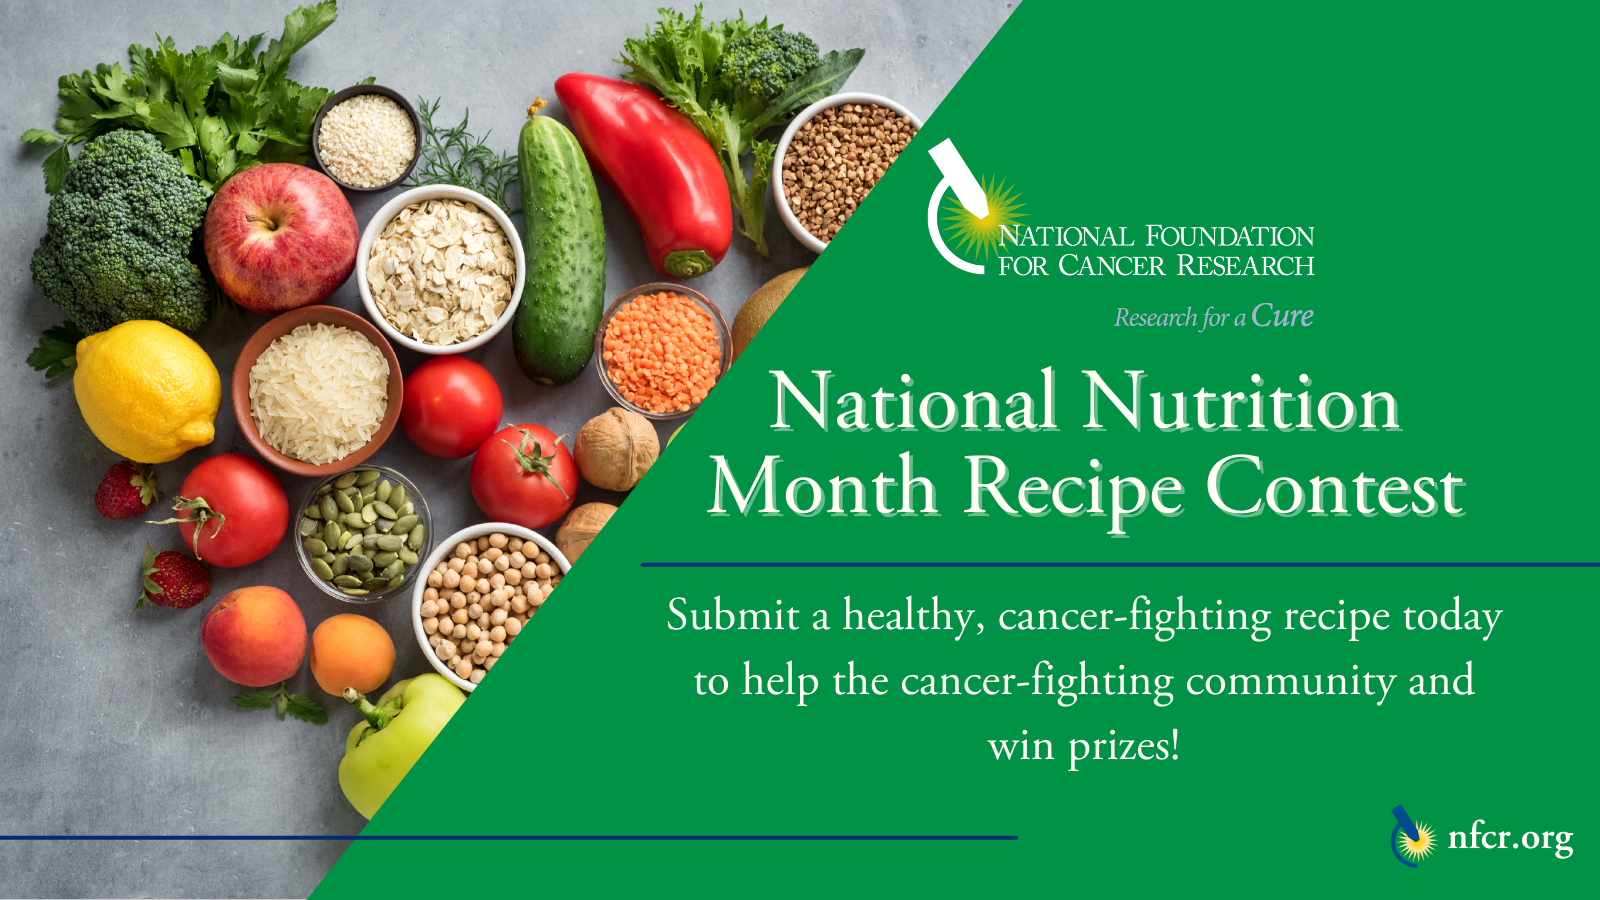 National Nutrition Month Recipe Contest Presented by NFCR